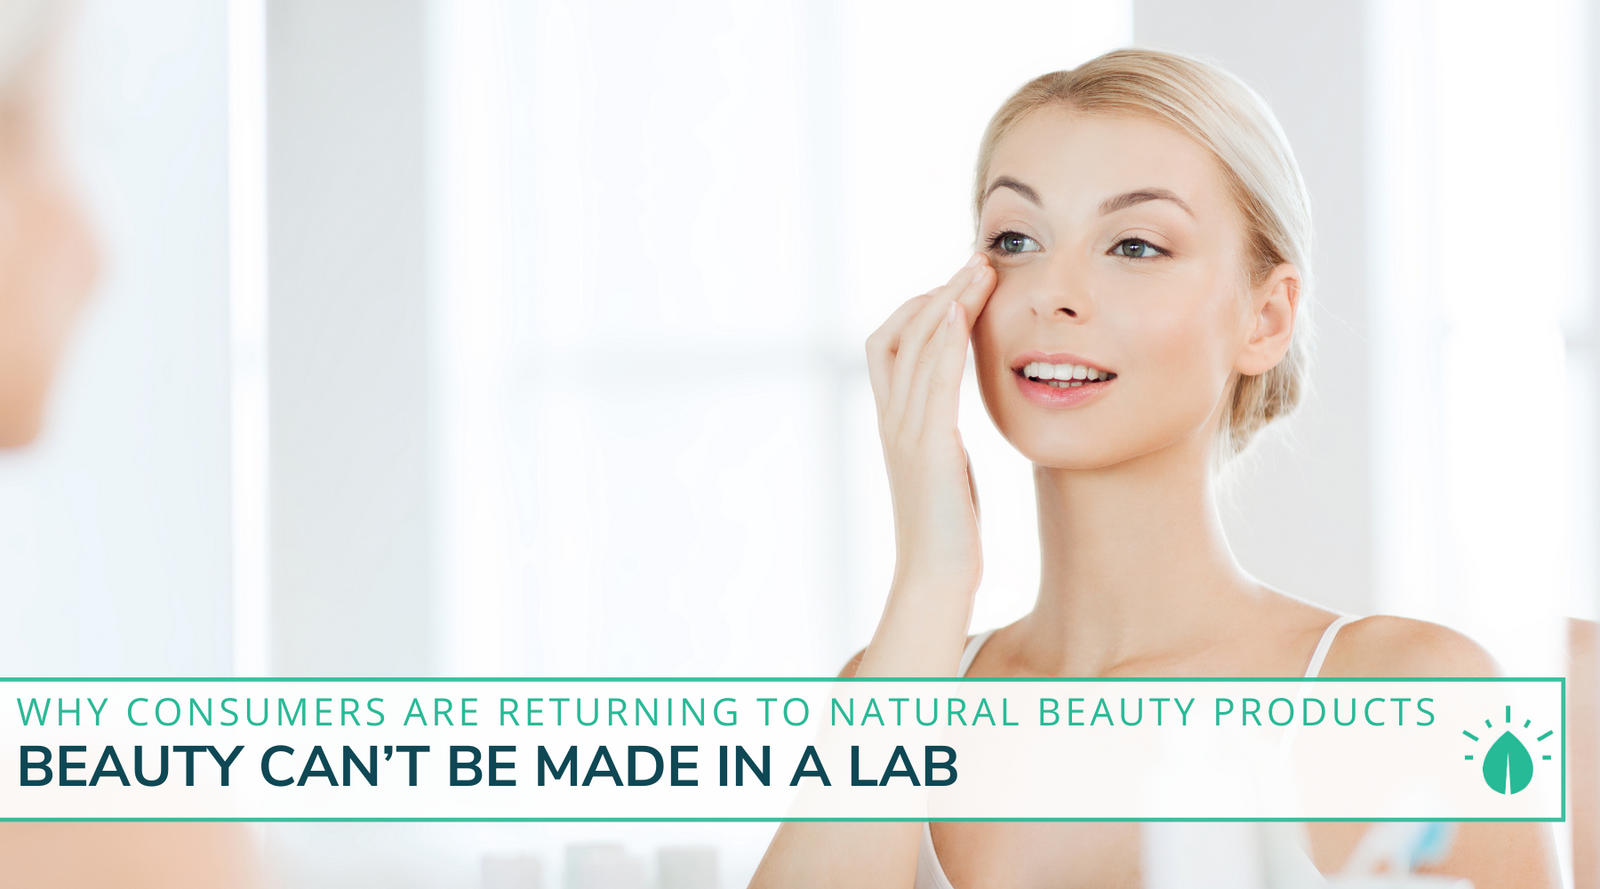 Beauty Can't Be Made in a Lab: Why Consumers Are Returning to Natural Beauty Products